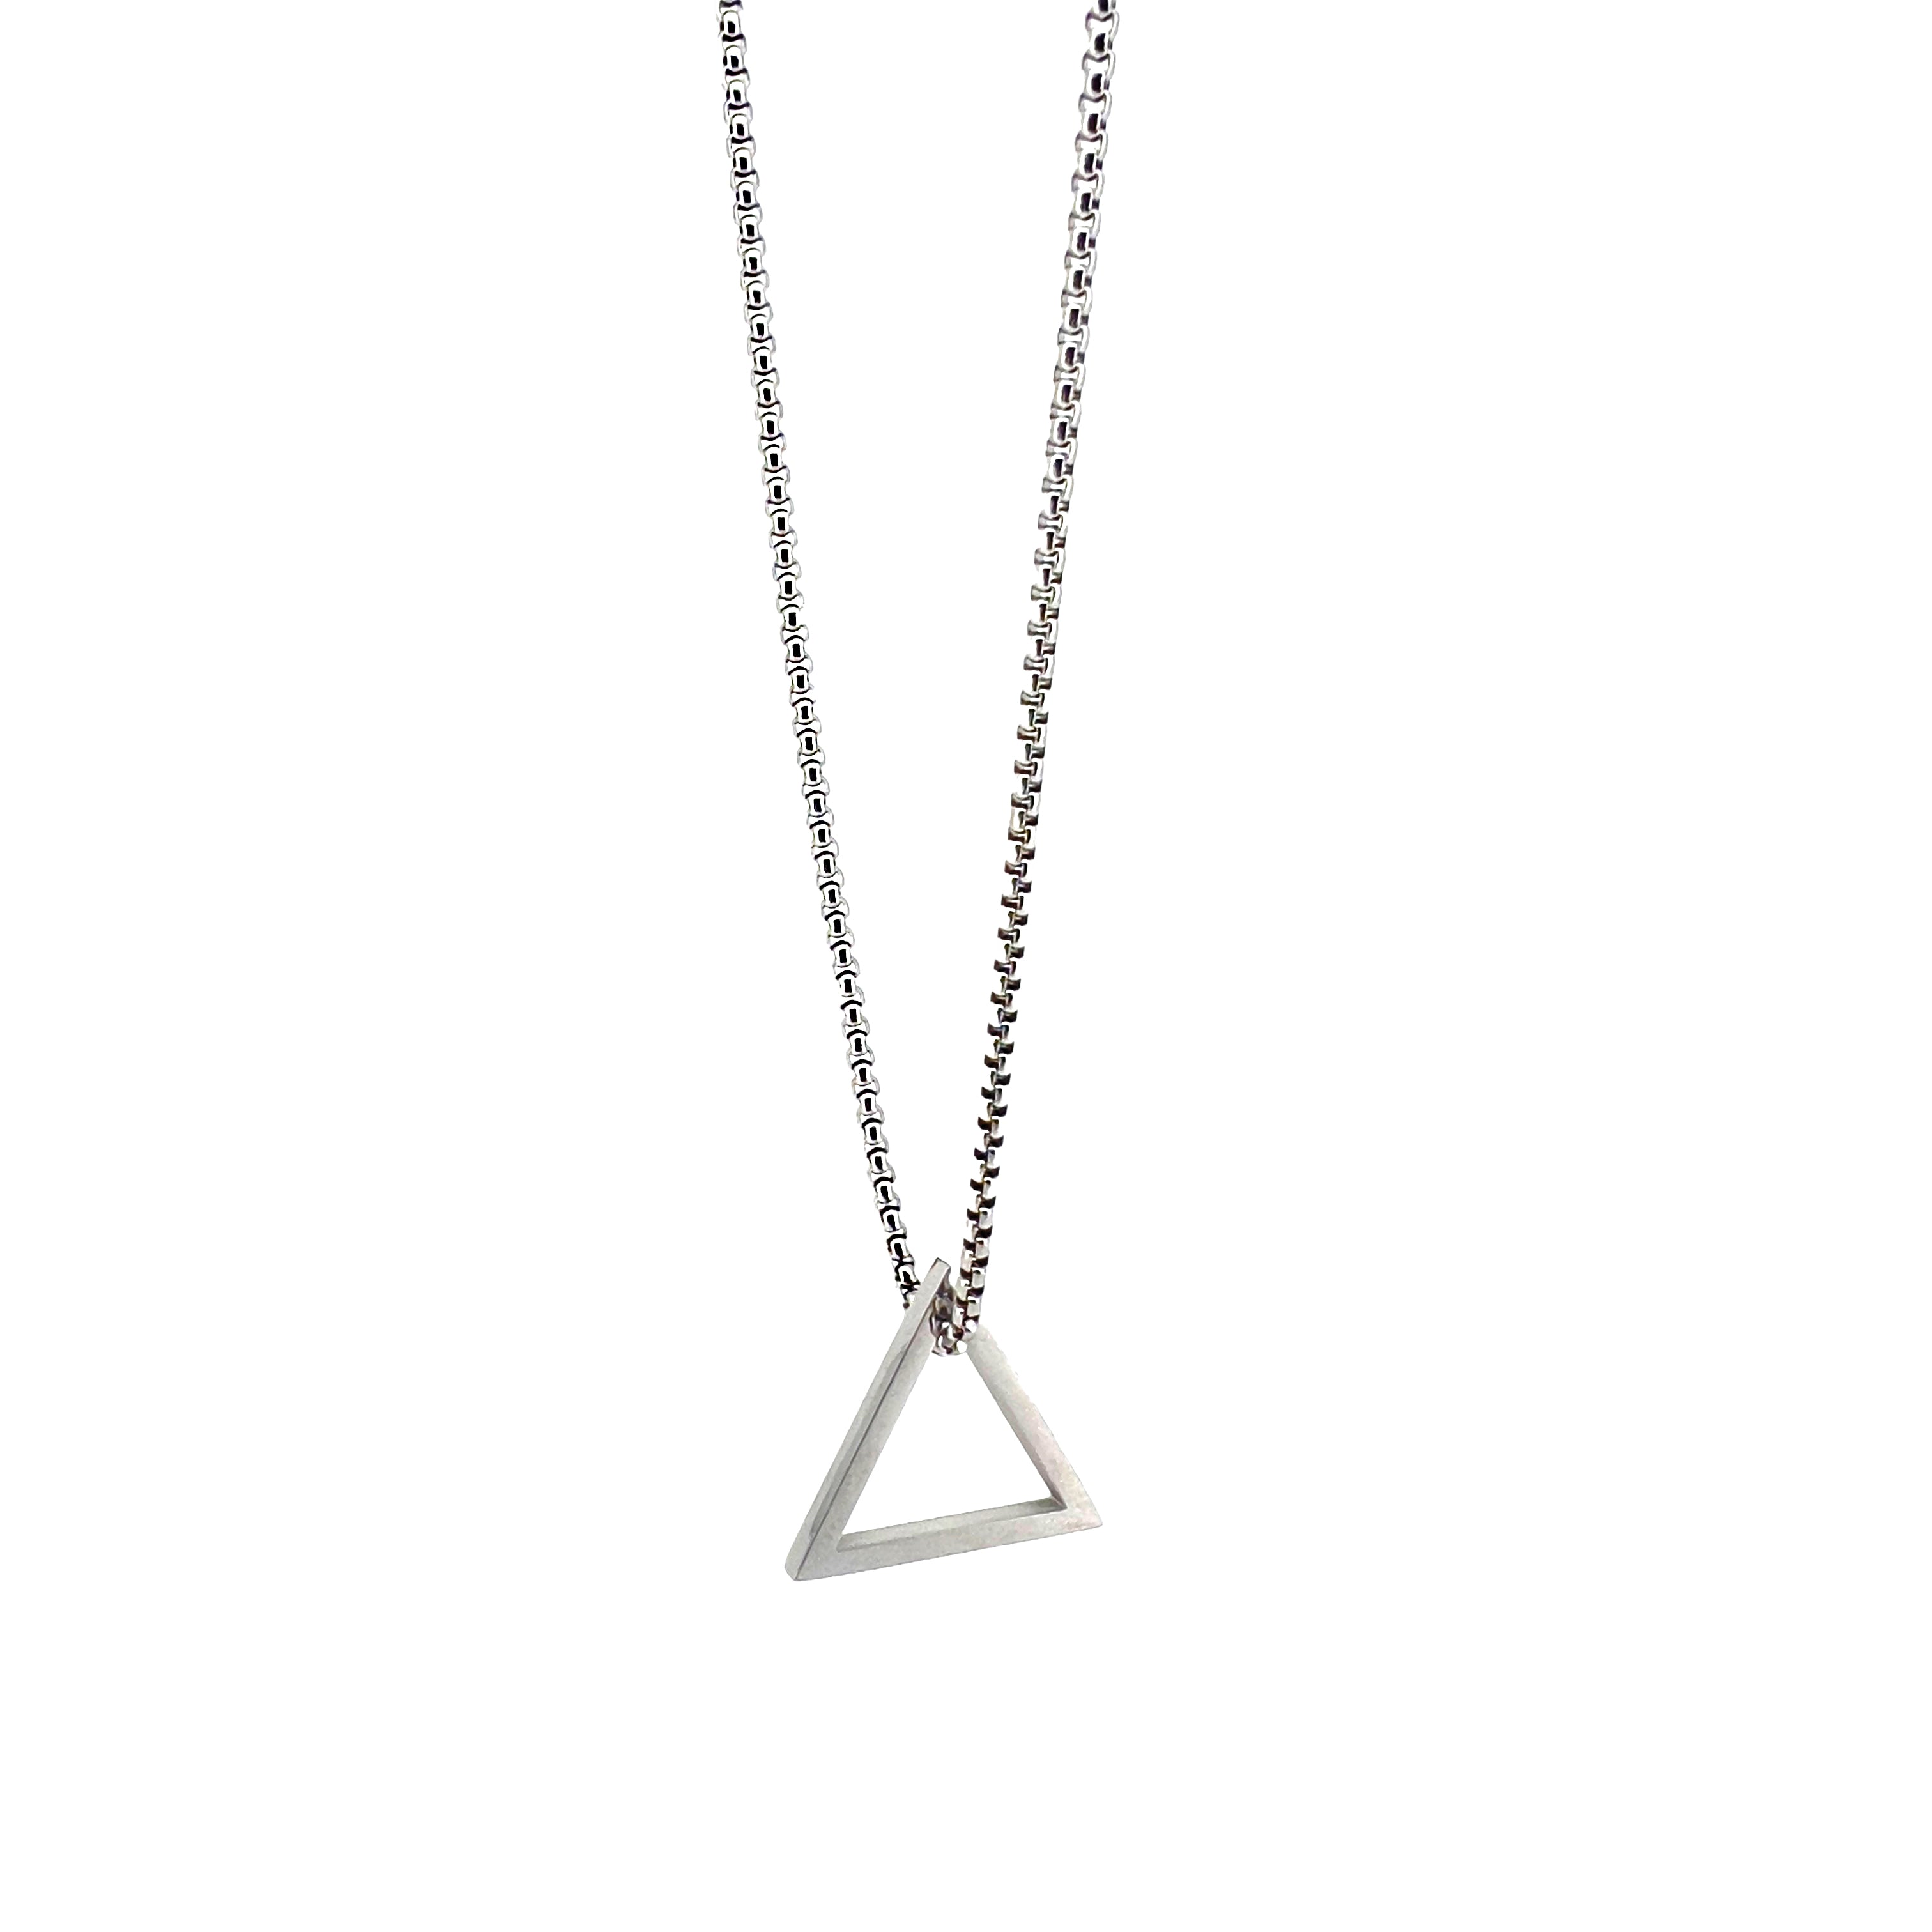 Kash Stainless Steel Necklace with Triangle Pendant